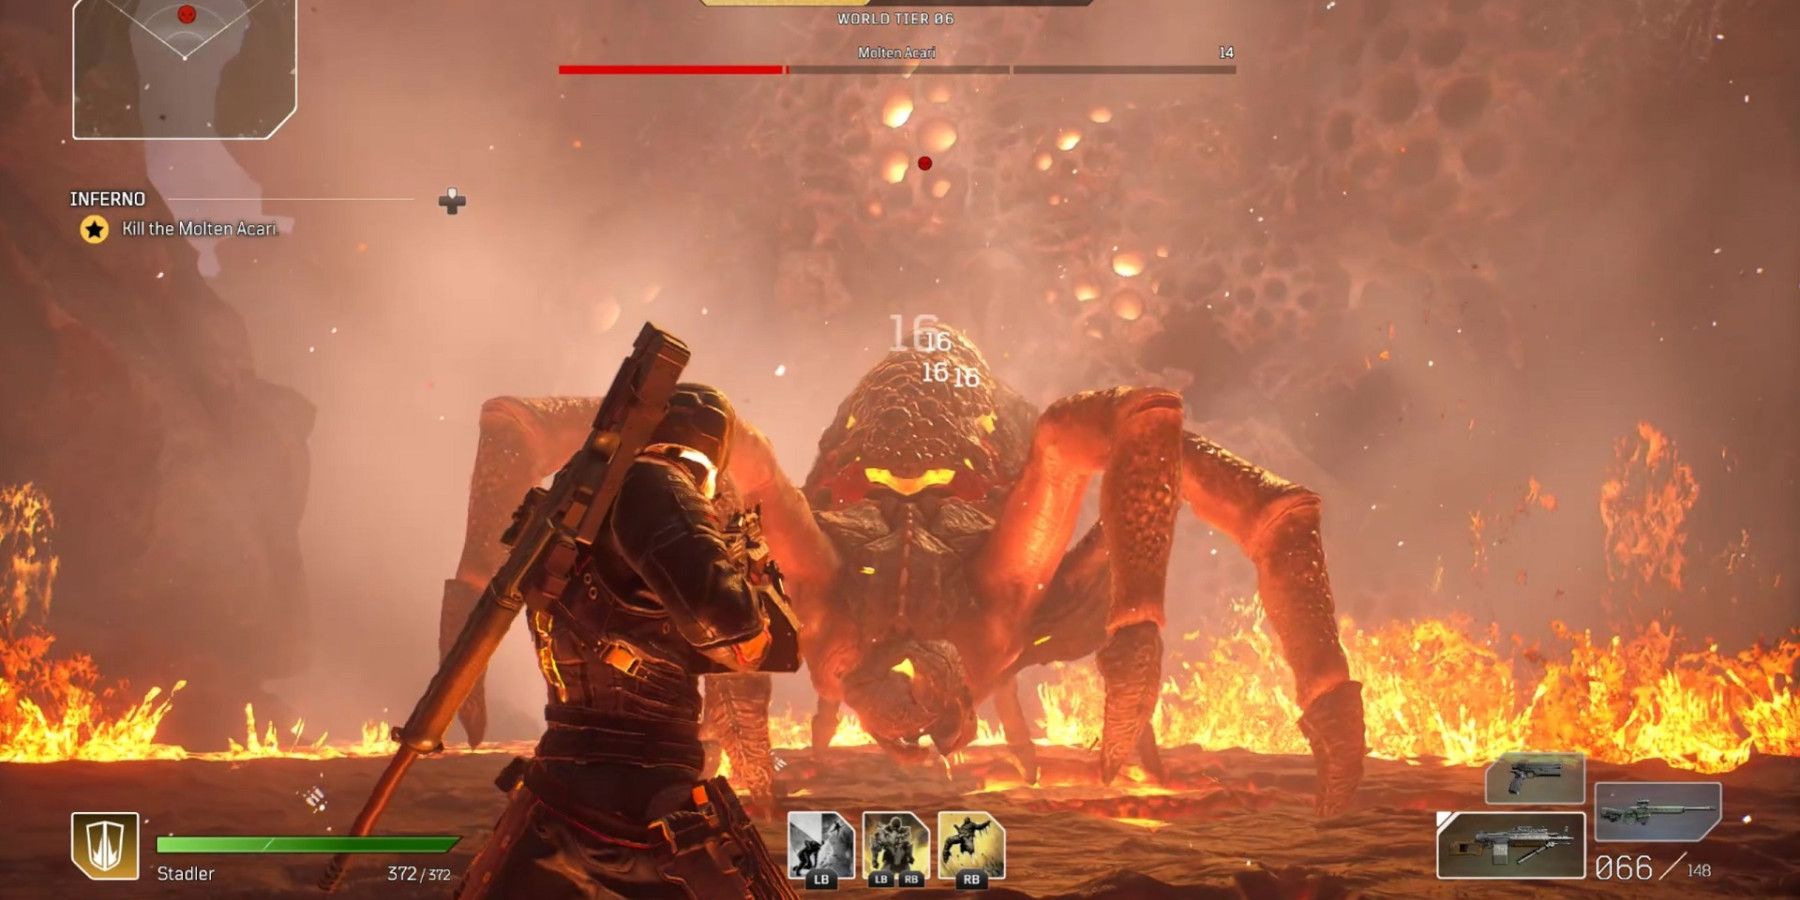 outriders-fighting-giant-fire-spider-boss